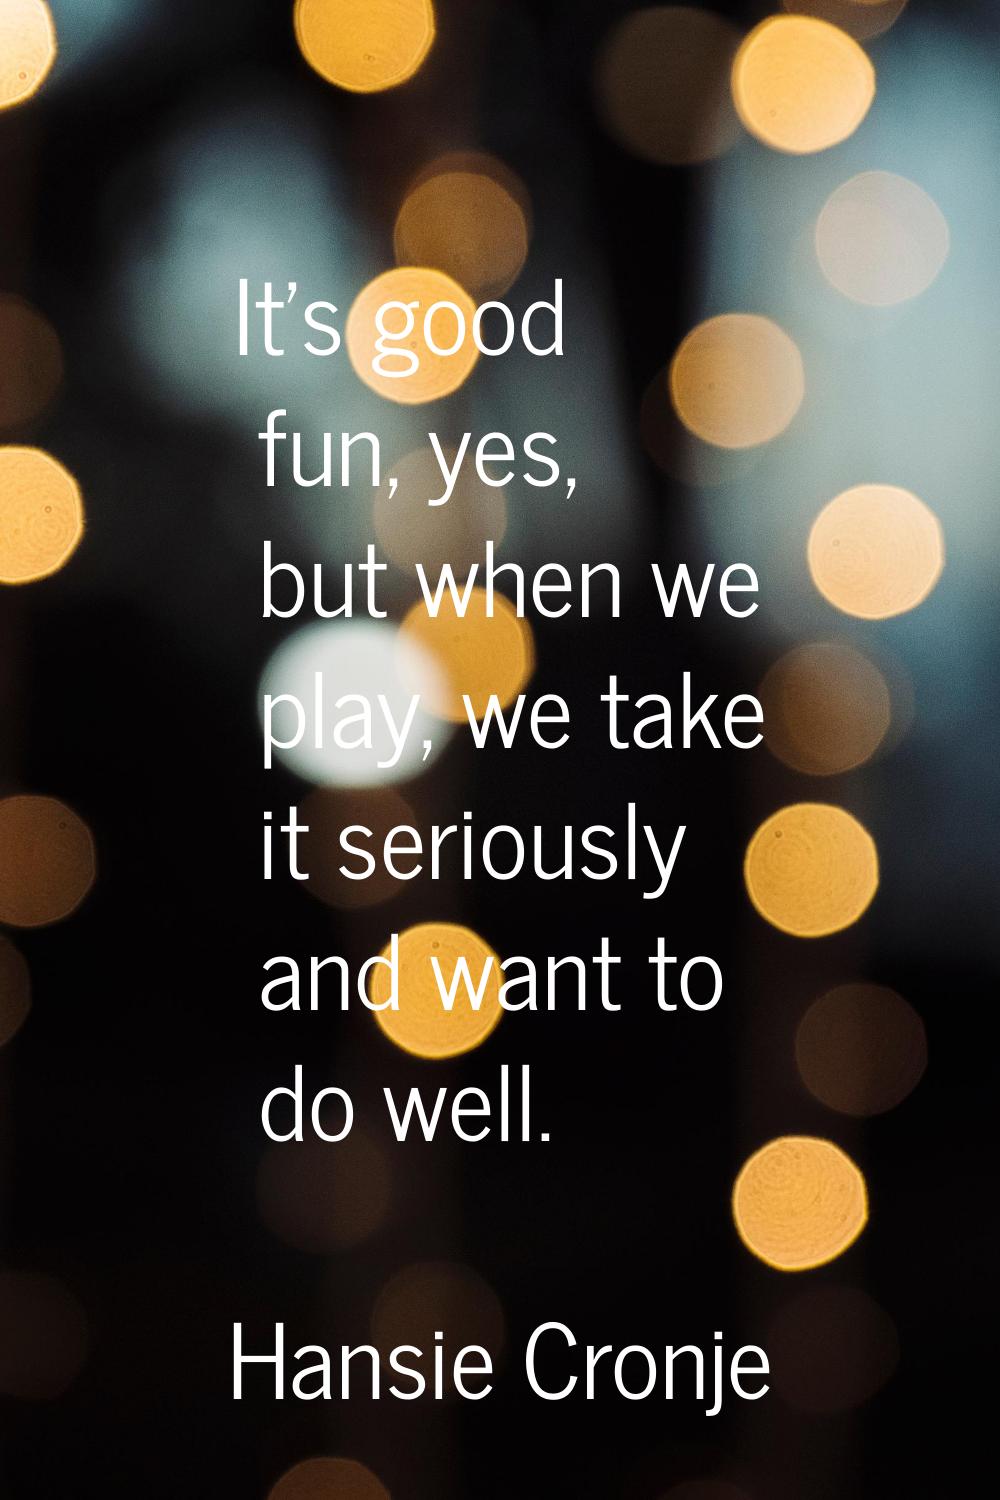 It's good fun, yes, but when we play, we take it seriously and want to do well.